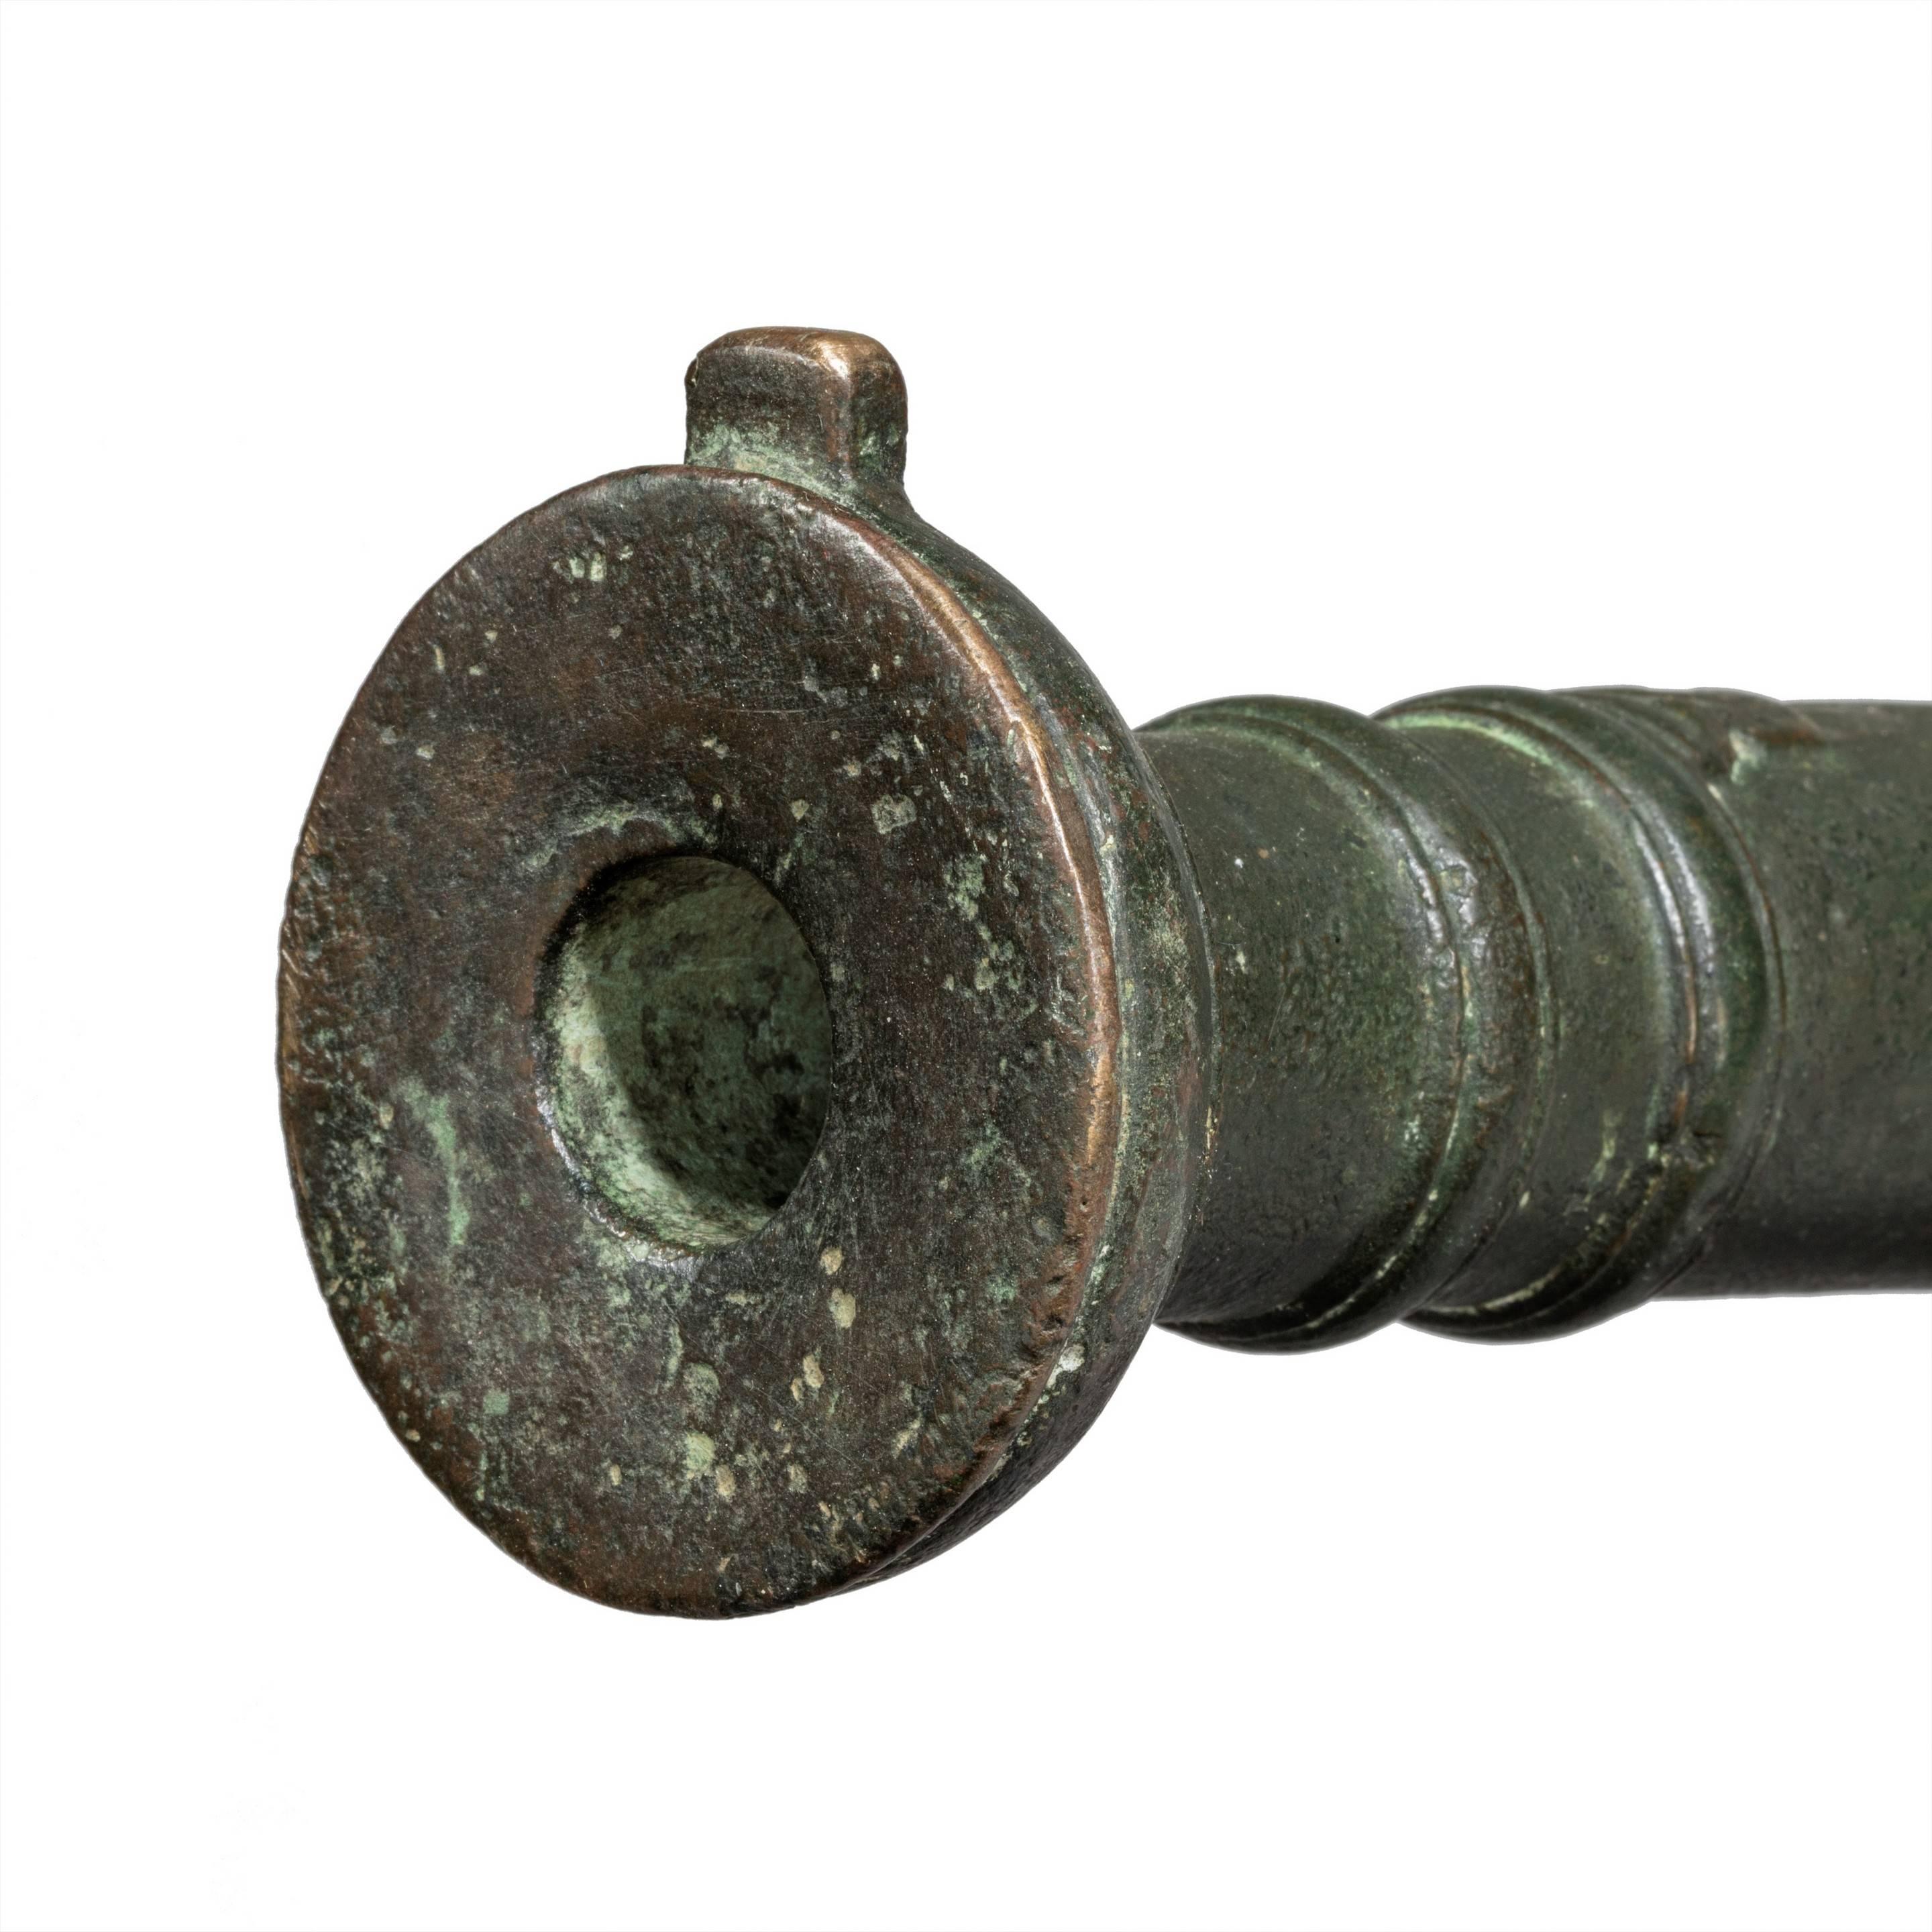 A late 18th century Lantaka bronze cannon barrel with flared barrel and typical decoration.

Now hinged on an iron stand.